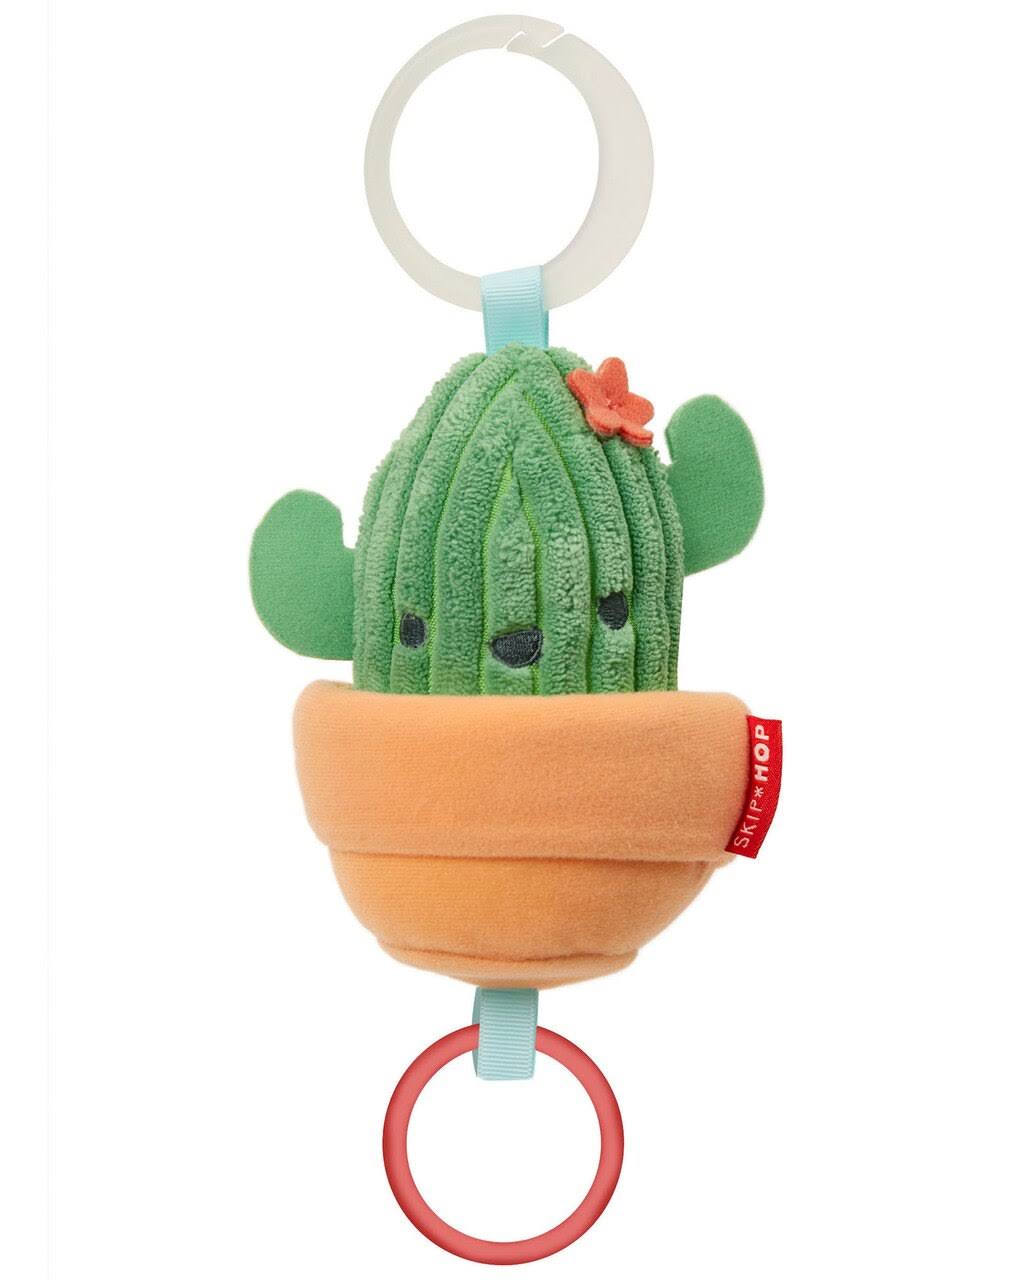 Skip Hop Farmstand - Cactus Jitter Stroller Toy